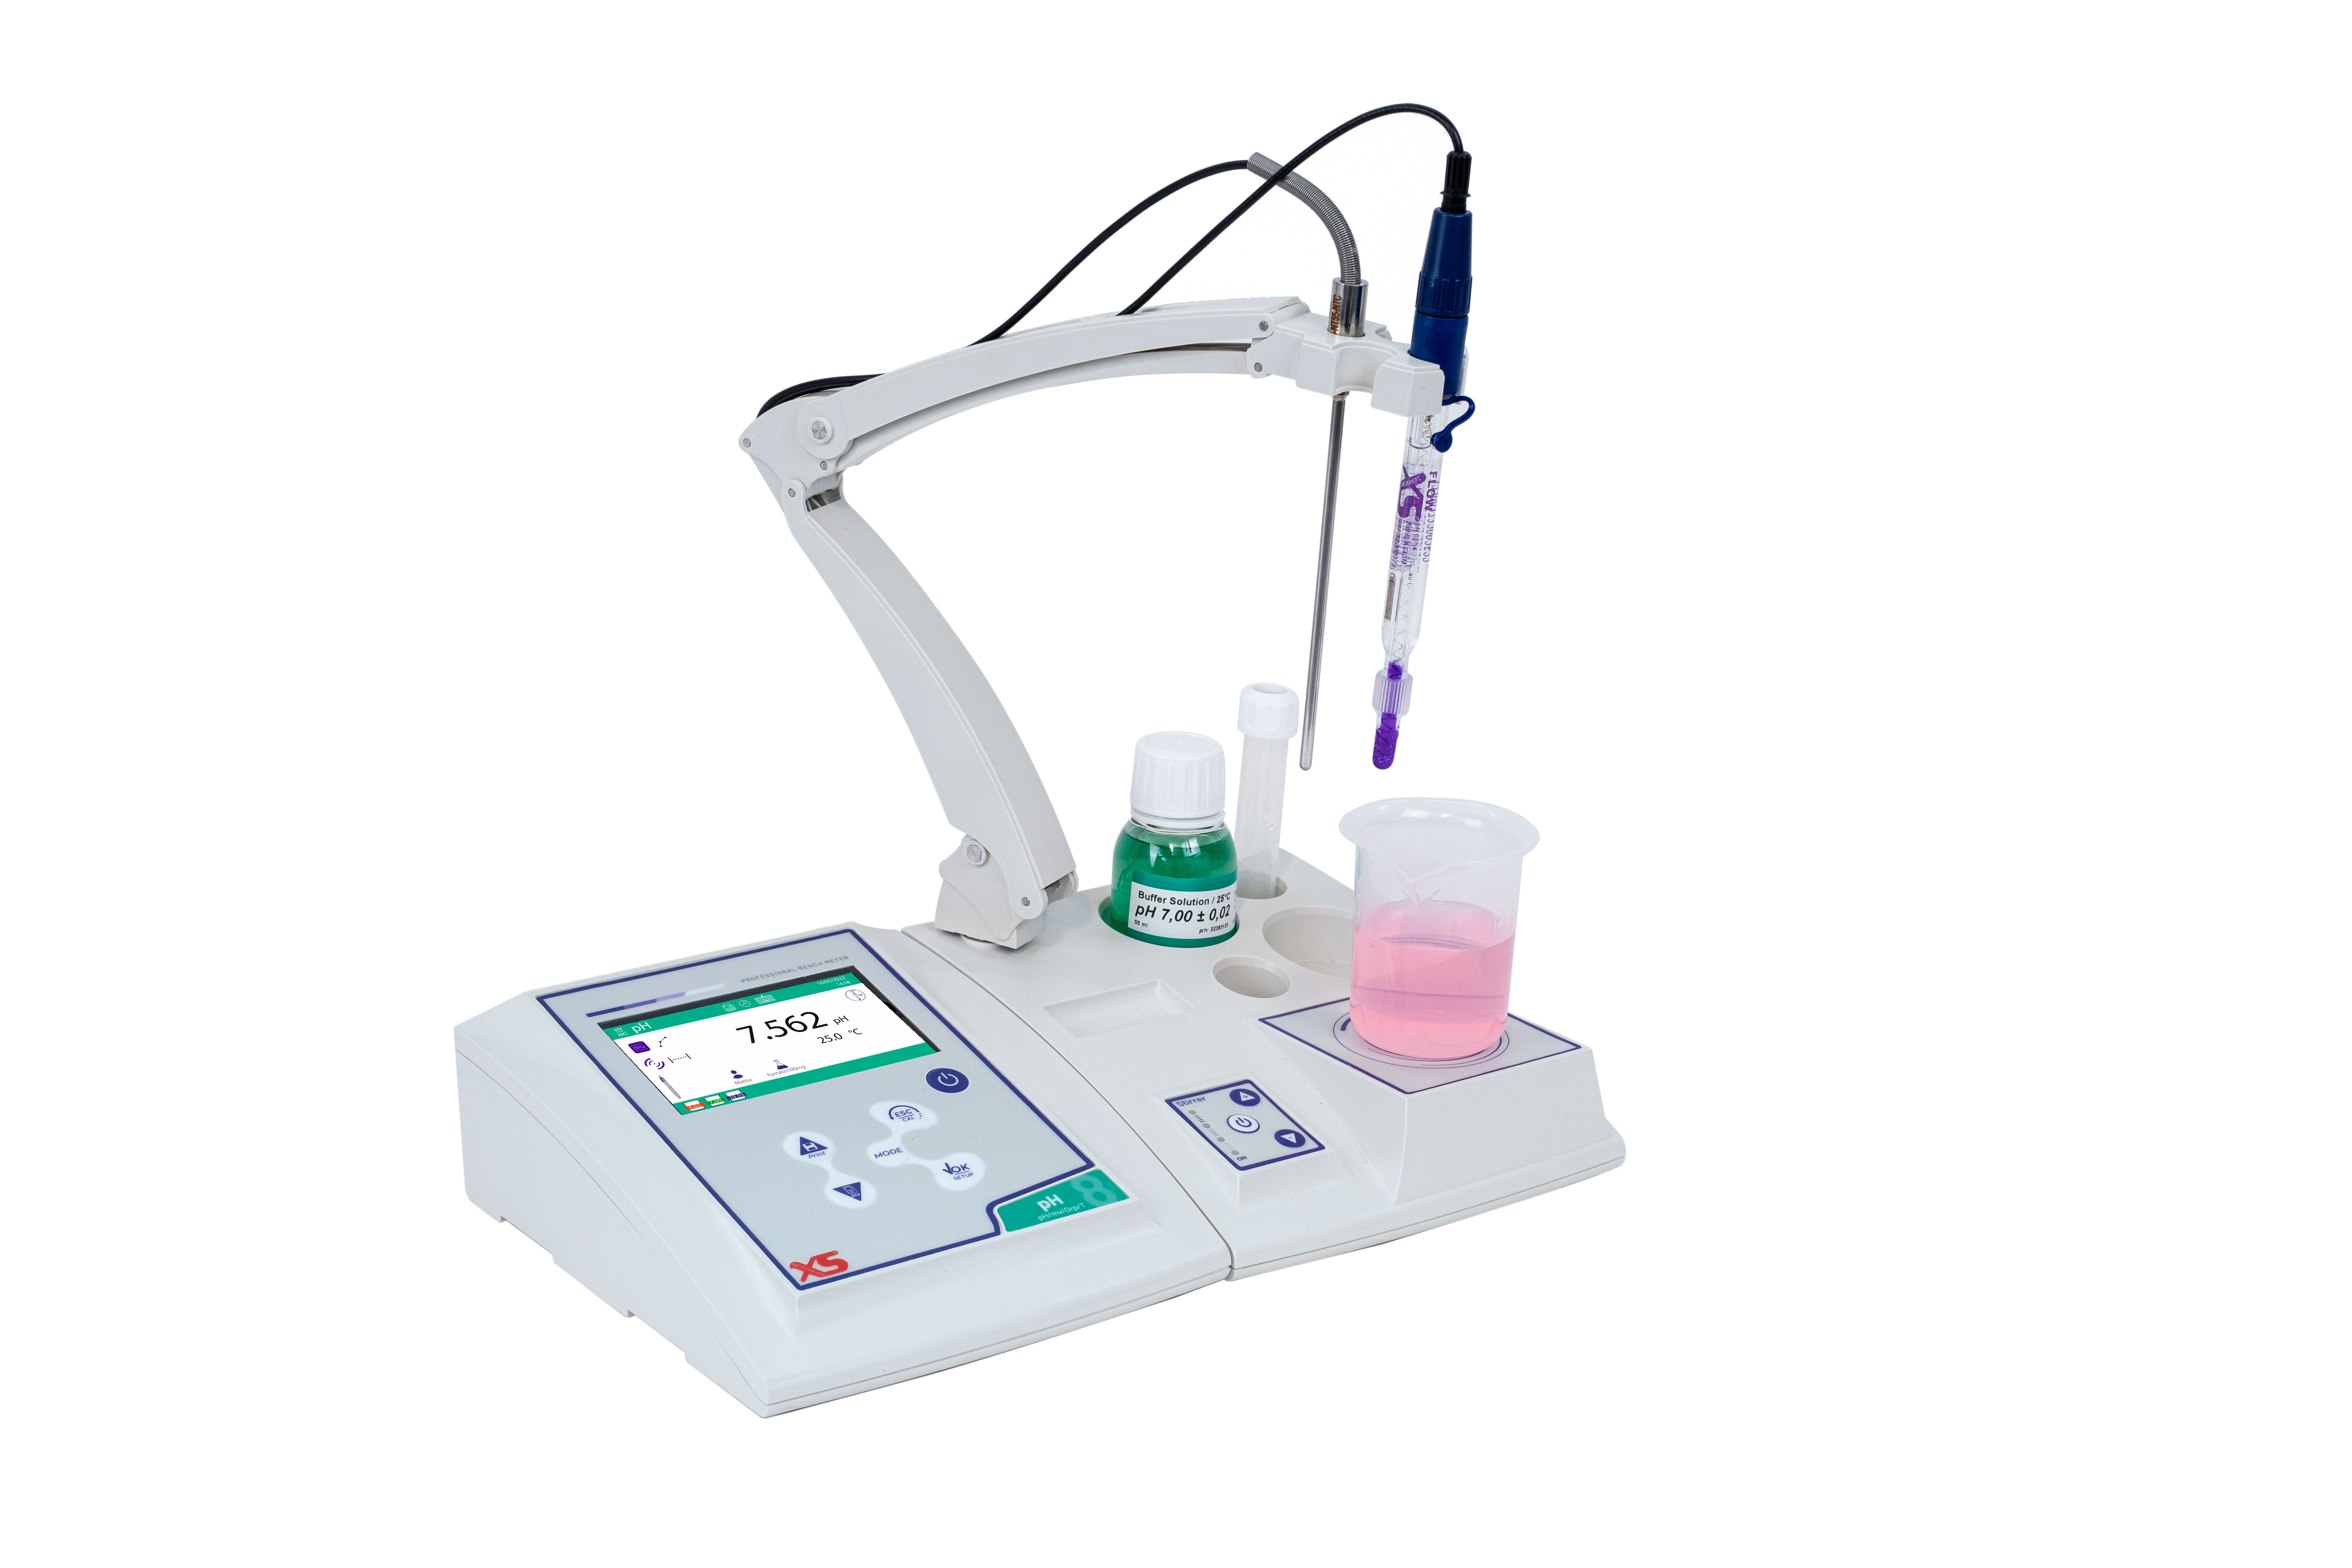 Benchtop pHmeters PH 8 PRO. XS. Magnetic stirrer with arm. Electrode: Hamilton Polylite Lab. Cable AS7/BNC. Tempreature sensor. Buffer solutions pH 7 and pH 4. Datalogger and Datalink software. Measurement range: pH -2.00 a 16.00. Temp. -10 a 120.0 ºC. mV ± 2000 mV.